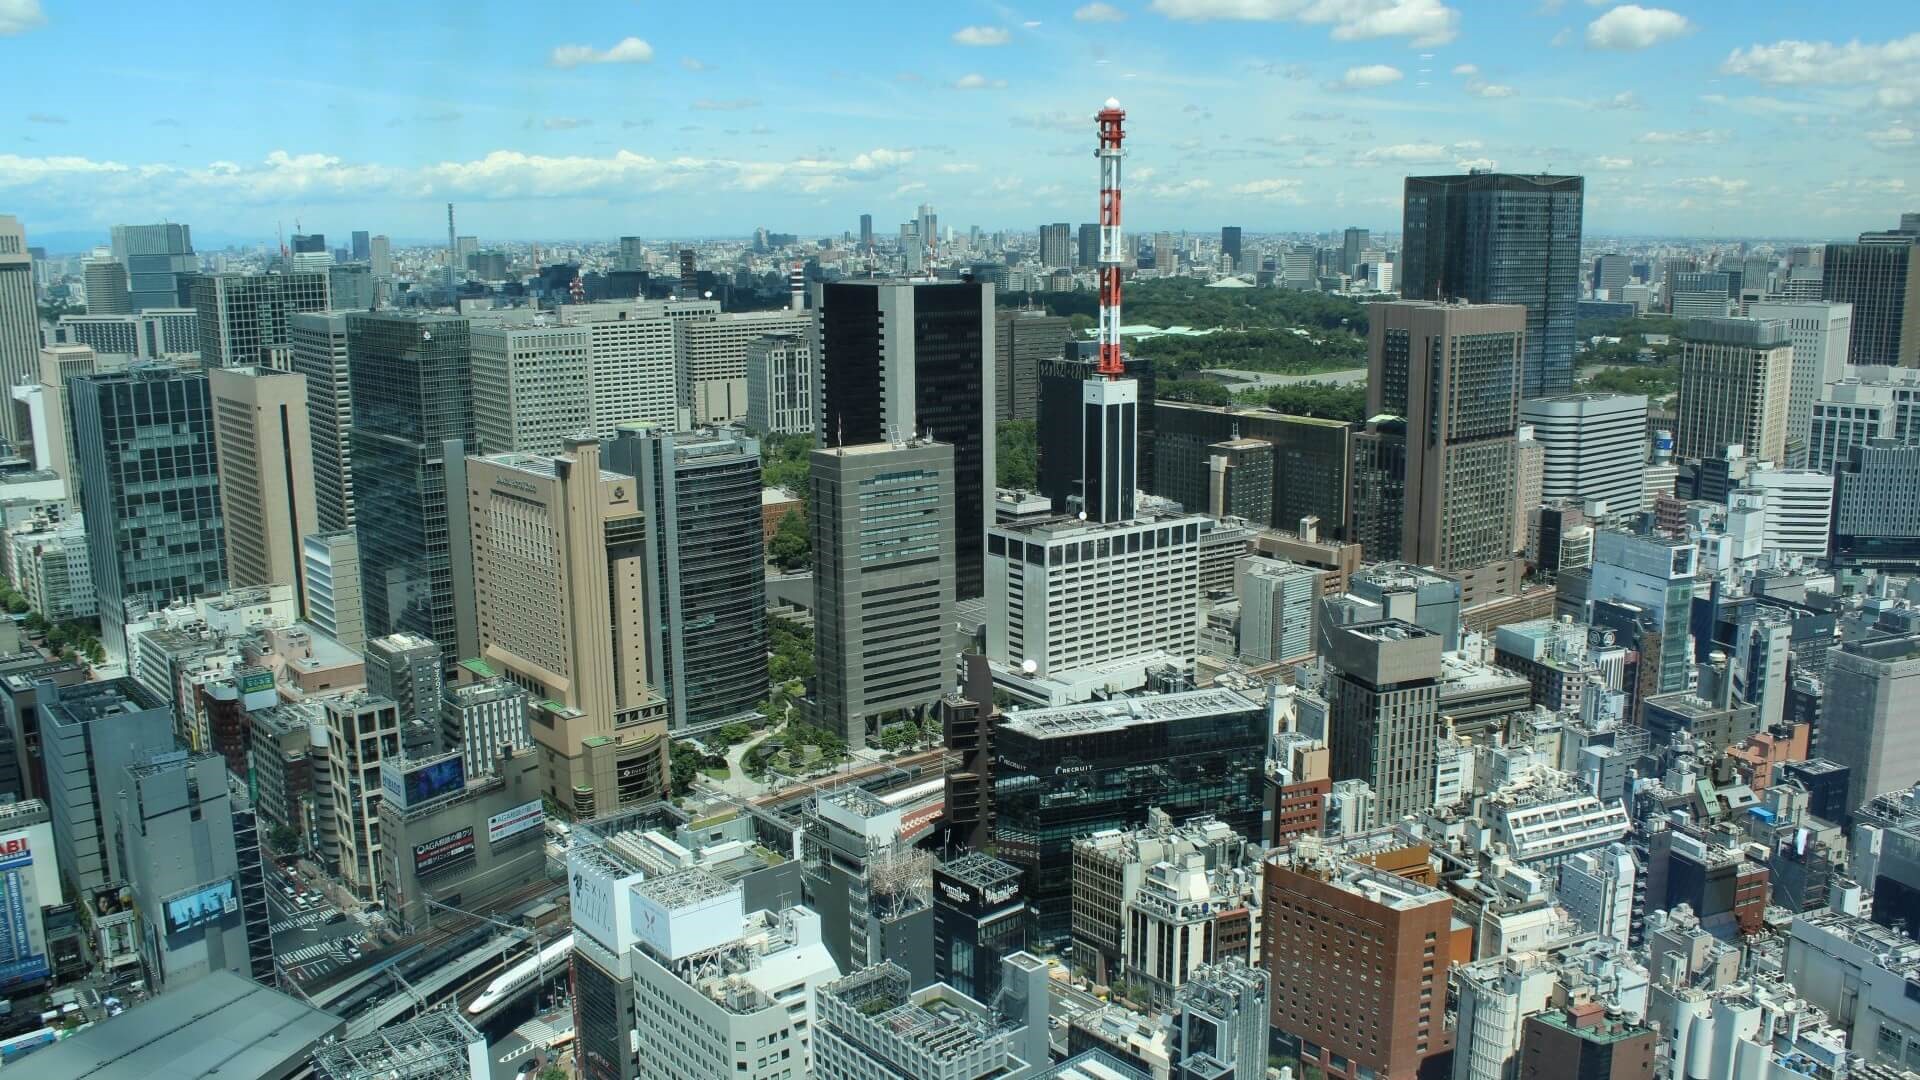 Aerial view of Tokyo with Fukushima’s owner Tokyo Electric Power Company’s headquarters building in centre